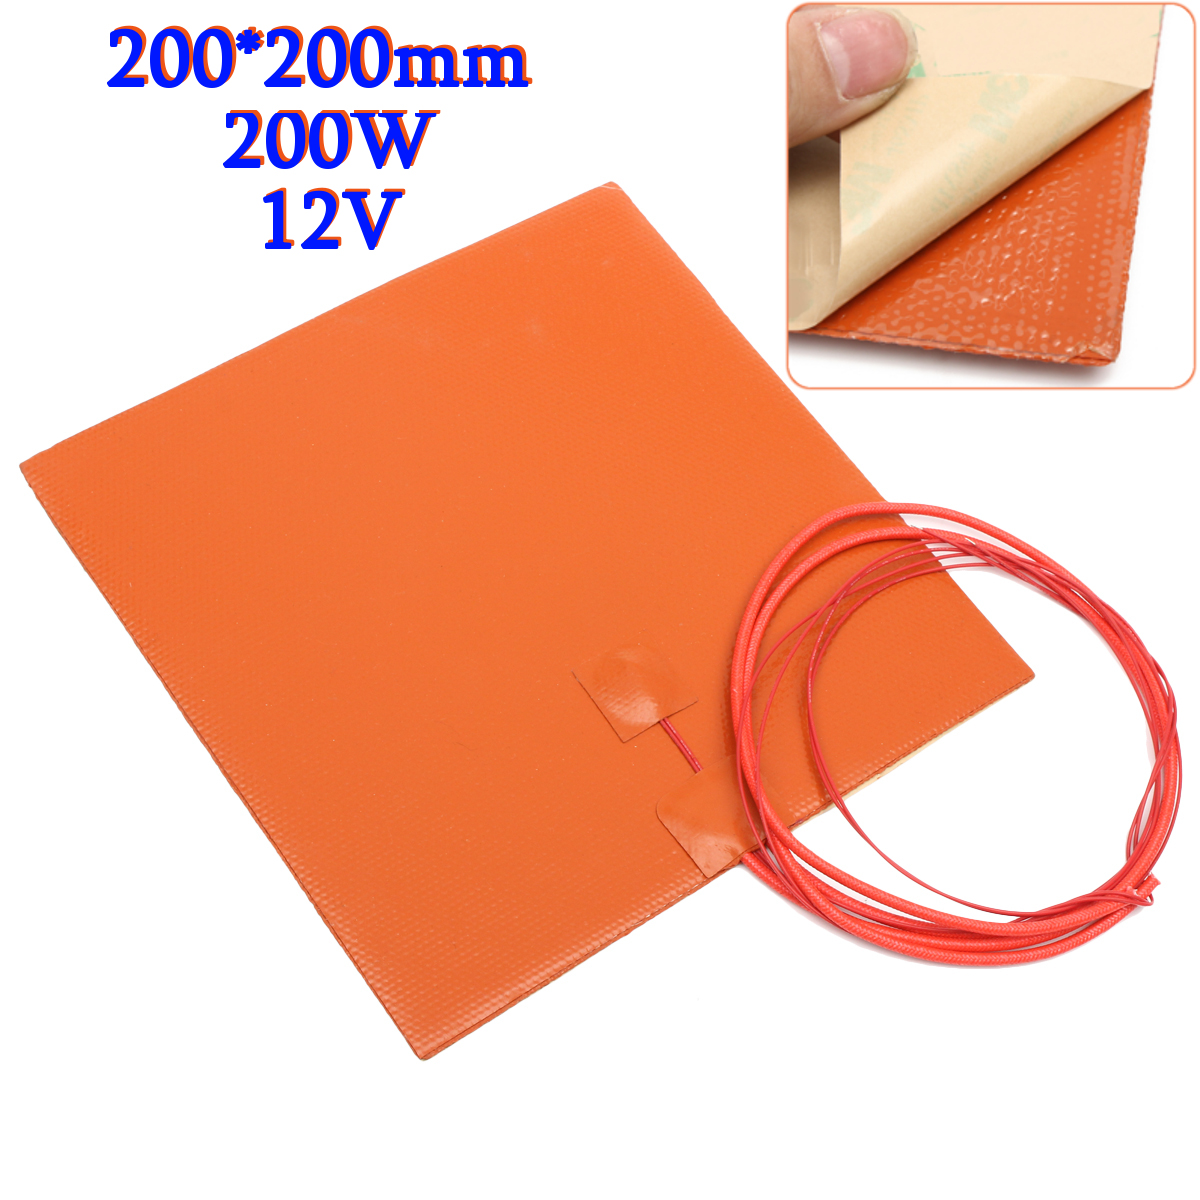 12V 200W 200mmx200mm Waterproof Flexible Silicone Heating Pad Heater For 3d Printer Heat Bed 7